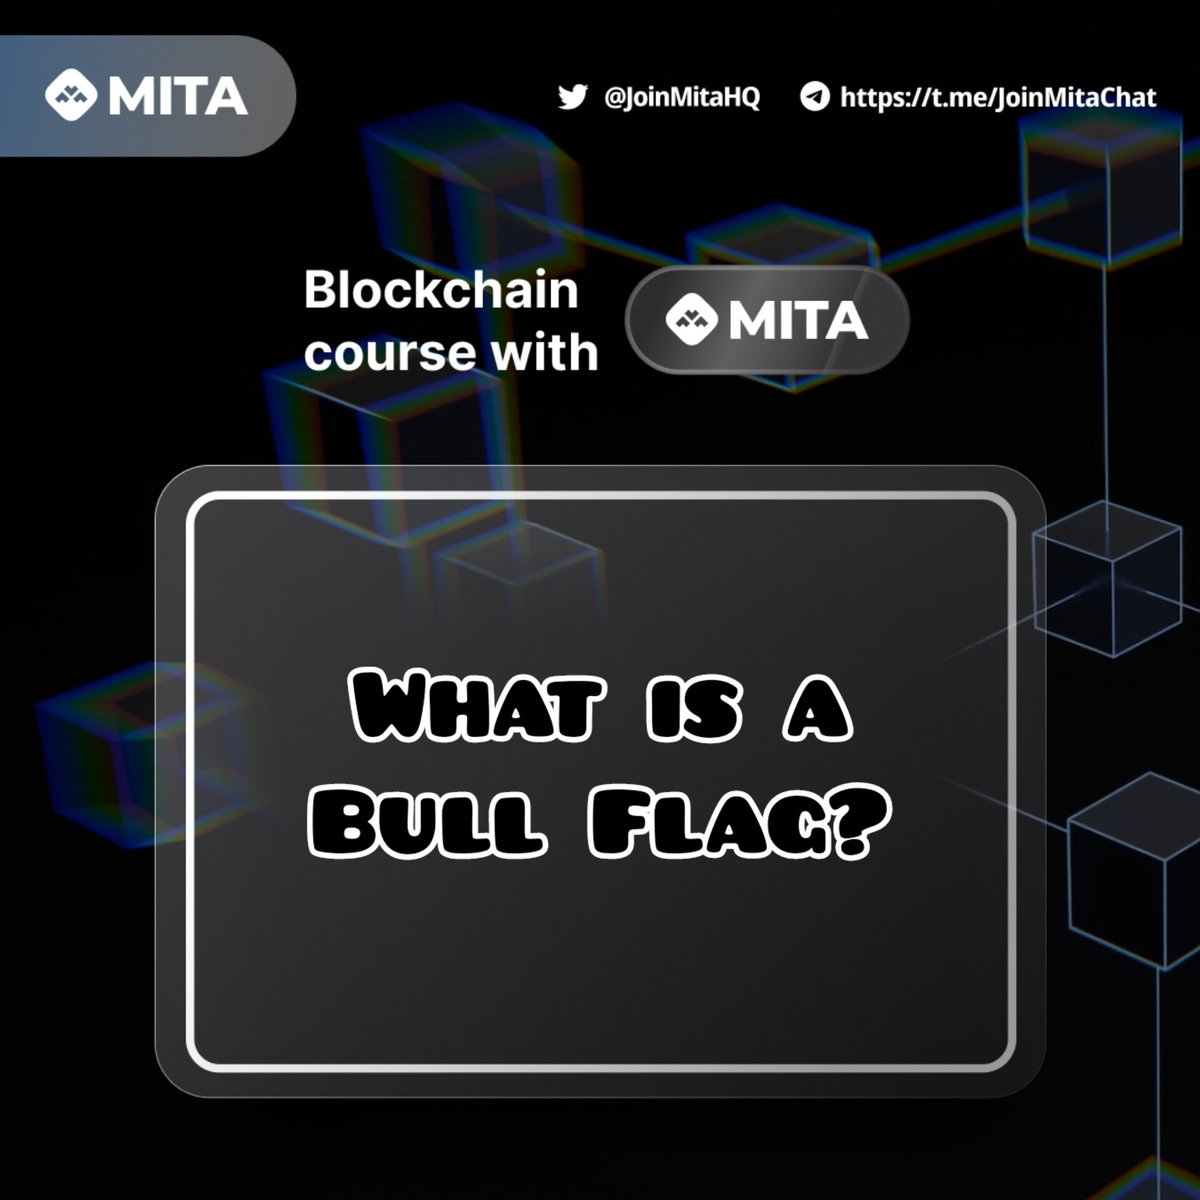 Blockchain course with MITA #Week33 📜✍

👨‍🏫What is a Bull Flag? 

A #BullFlag is a #Bullish chart pattern formed by two rallies separated by a brief consolidating retracement period, indicating that the market is probably going to start an #upward #trend. 

🧵👇